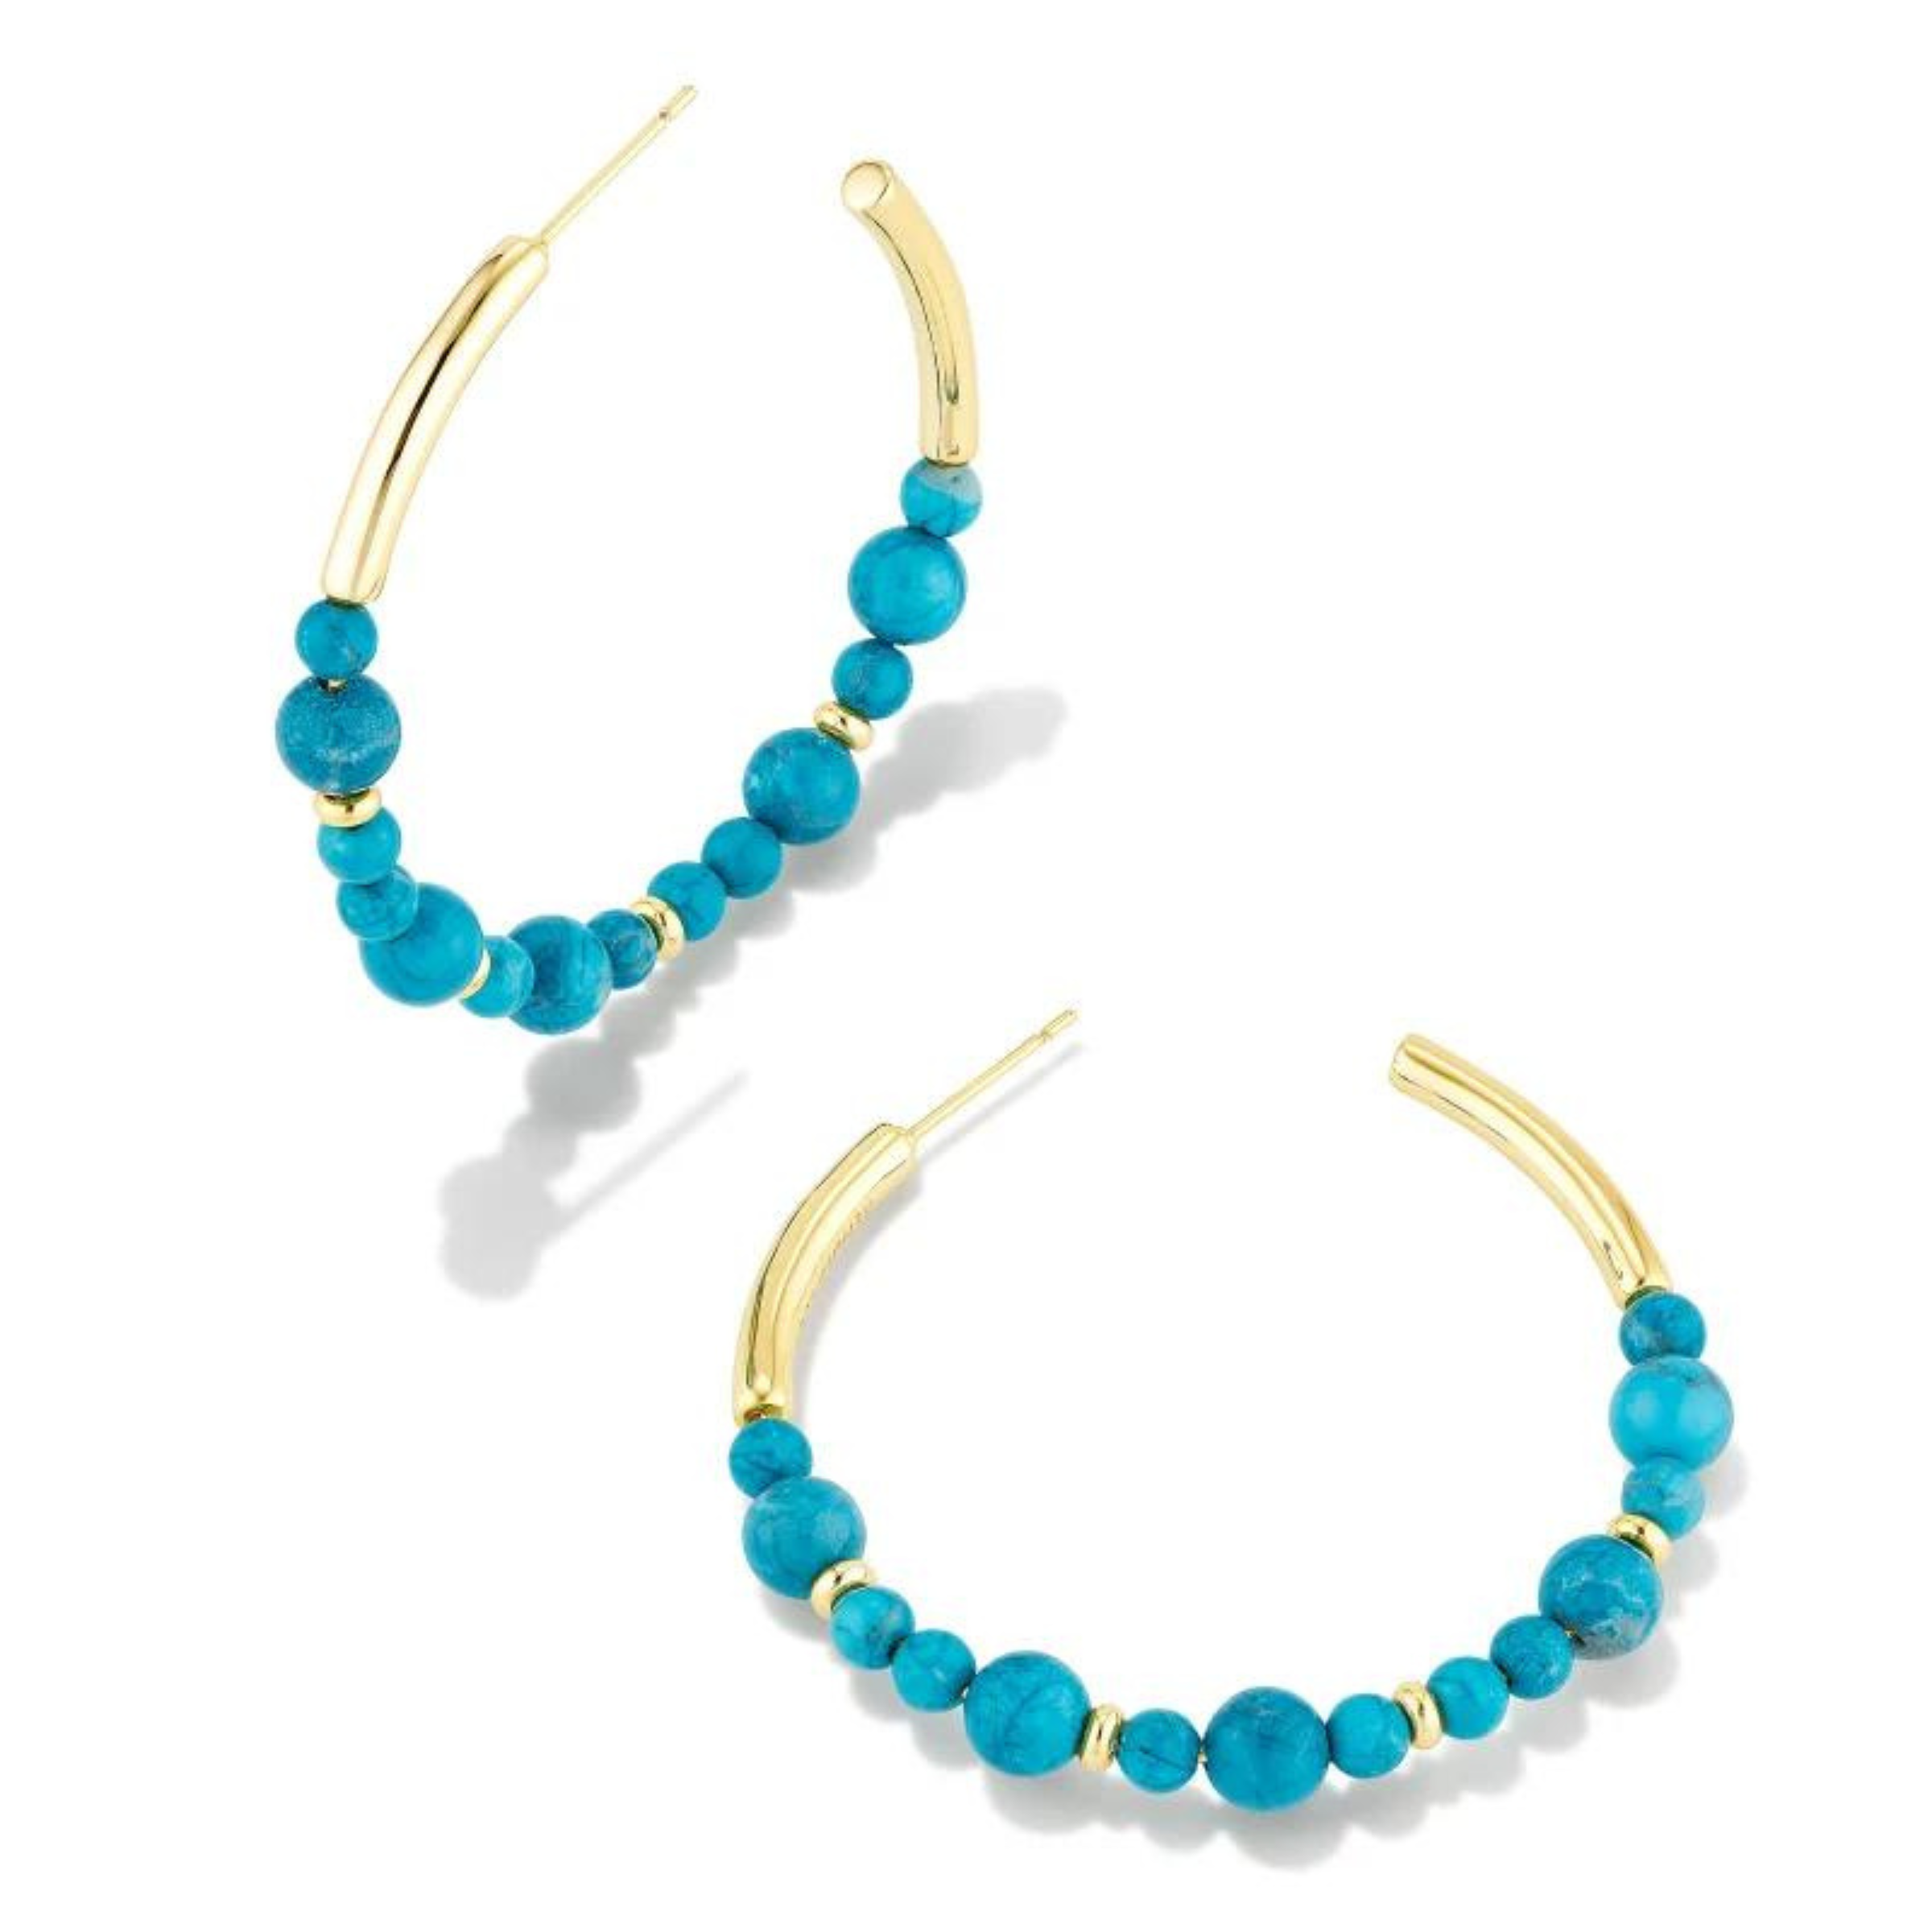 Gold hoop earrings with dark teal beads in varying sizes. These earrings are pictured on a white background. 